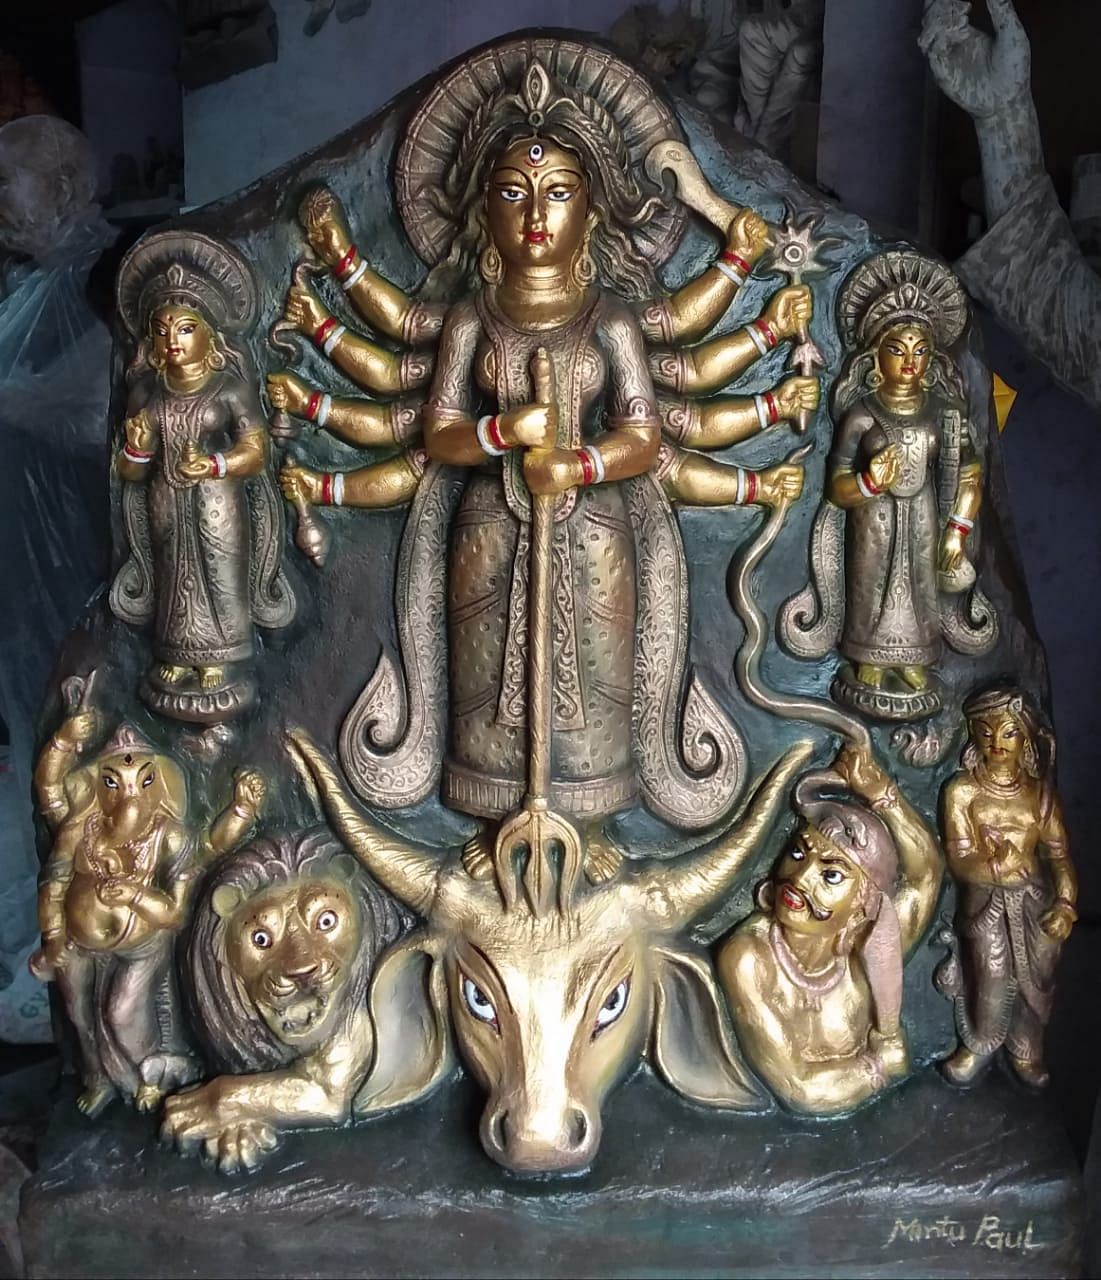 A miniature model of the proposed gold plated Durga idol.